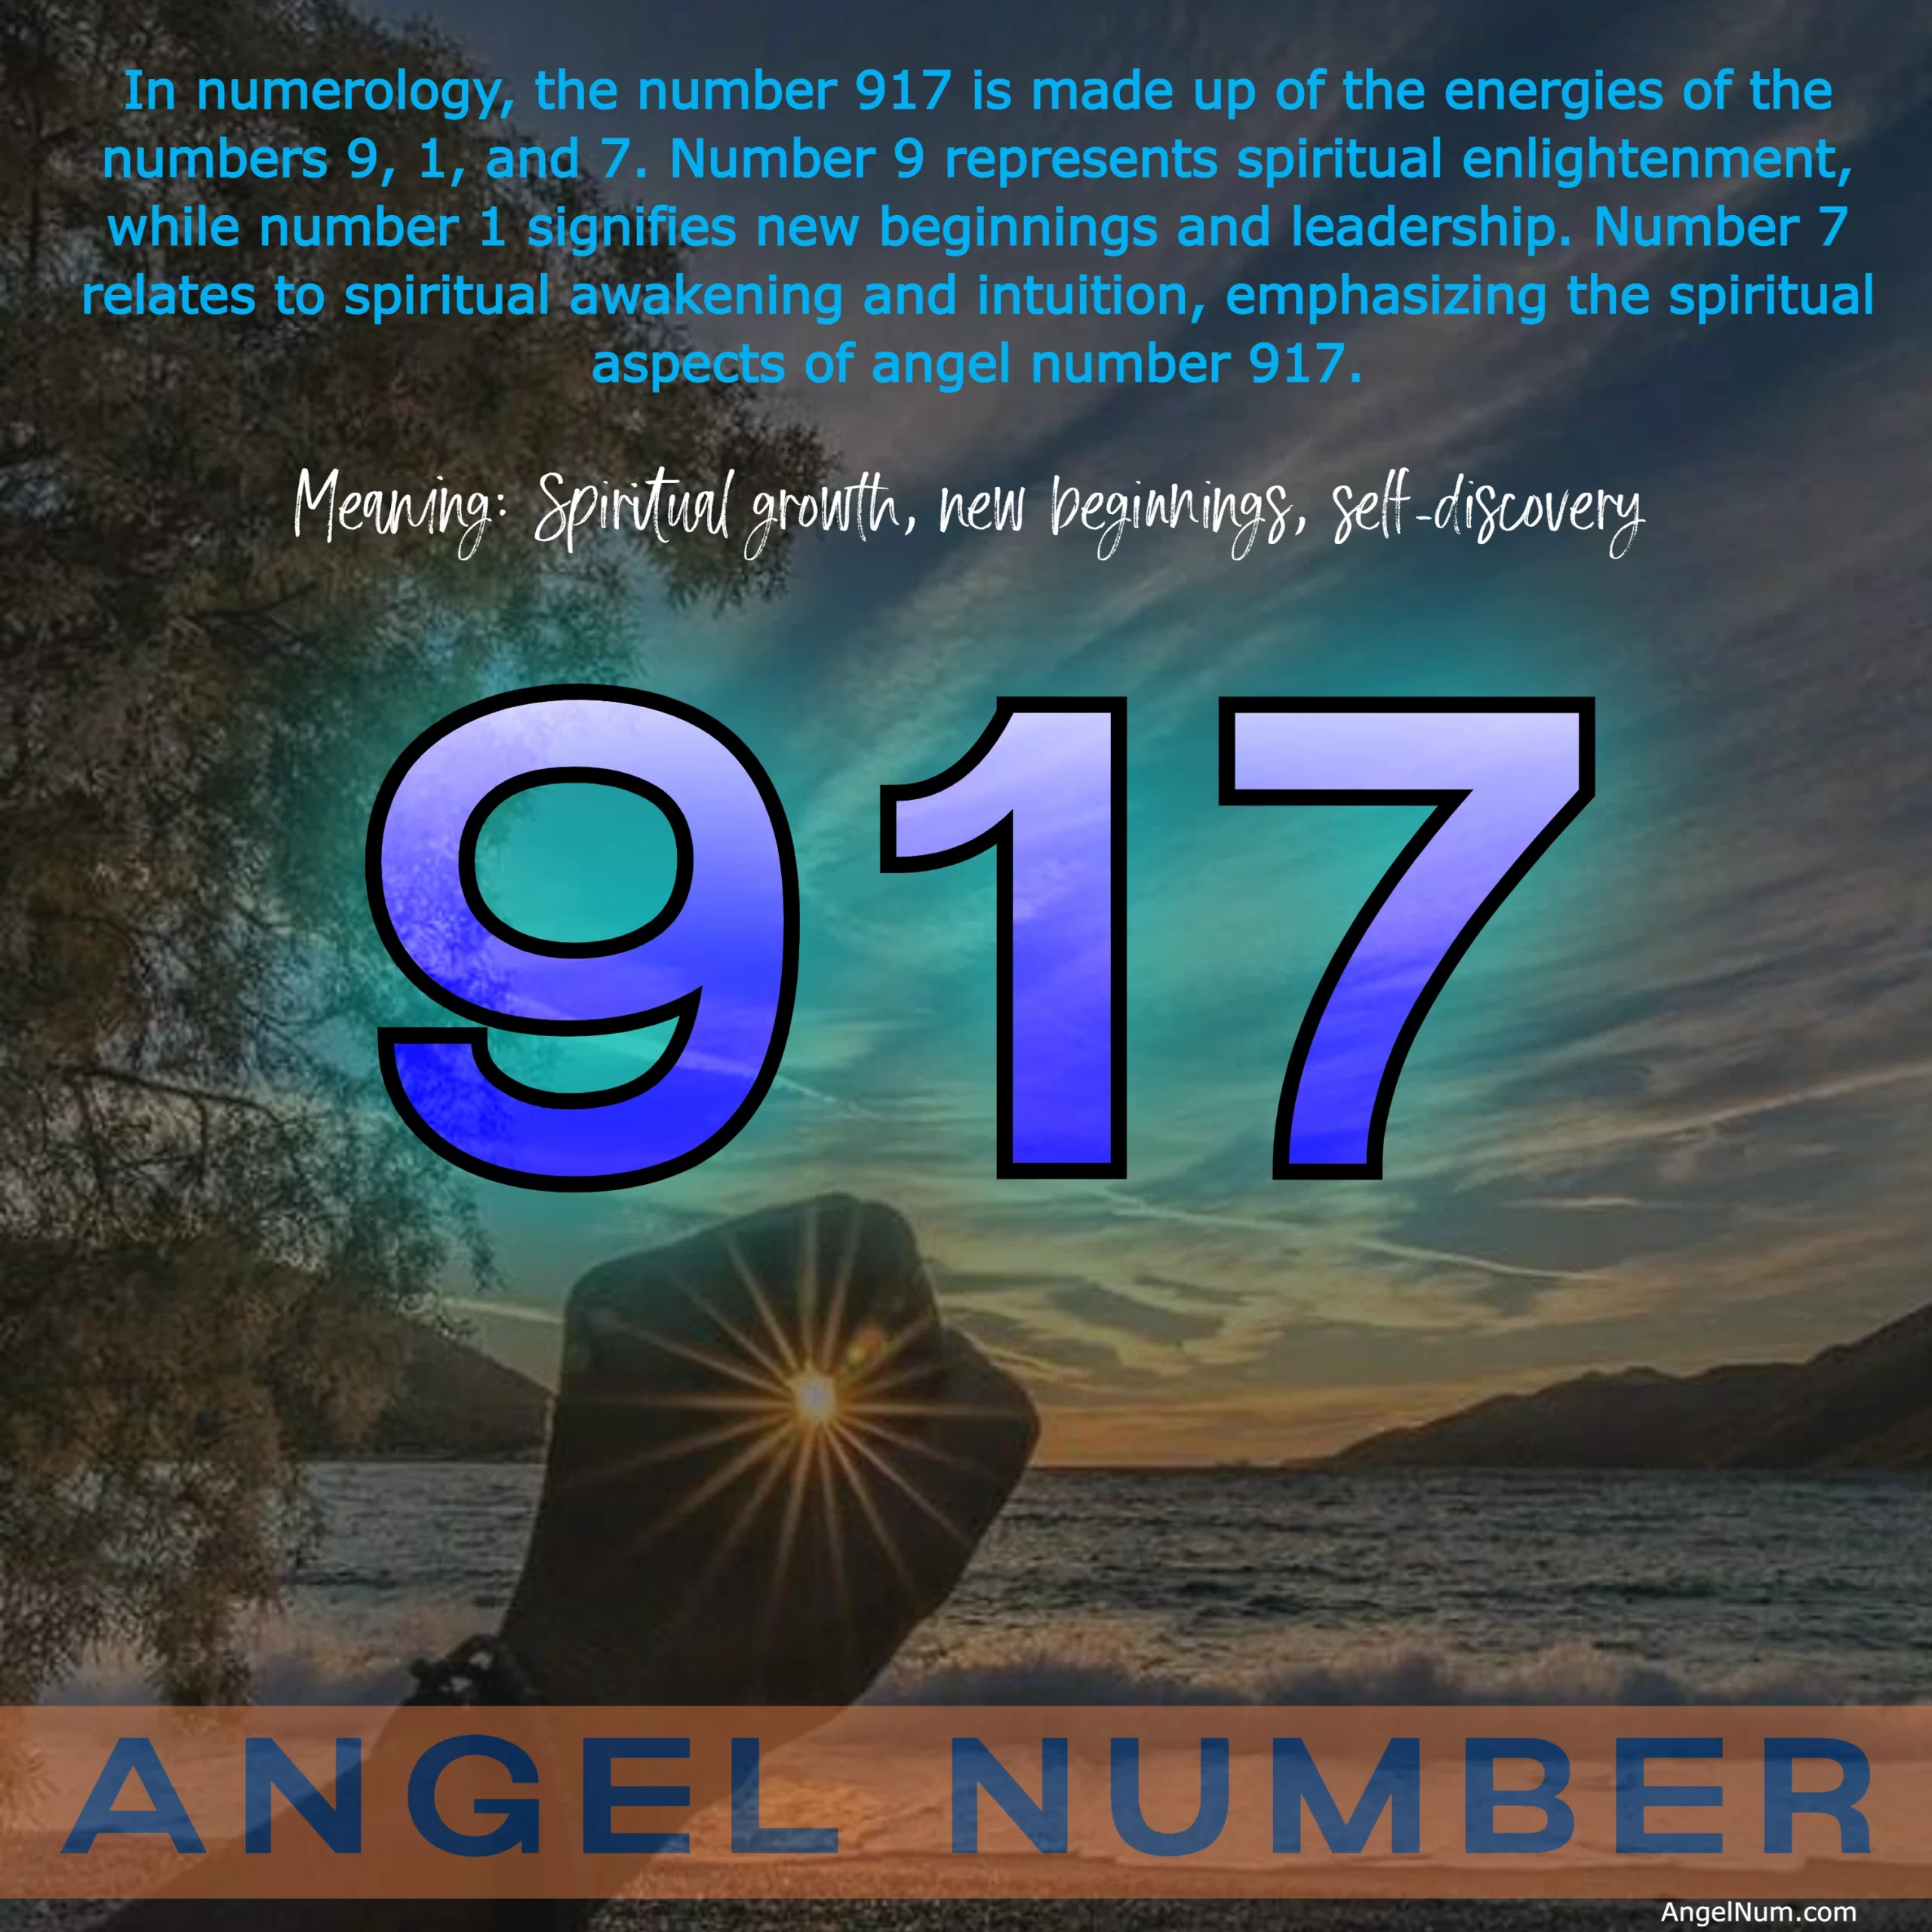 Angel Number 917: Spiritual Growth New Beginnings and Self-Discovery